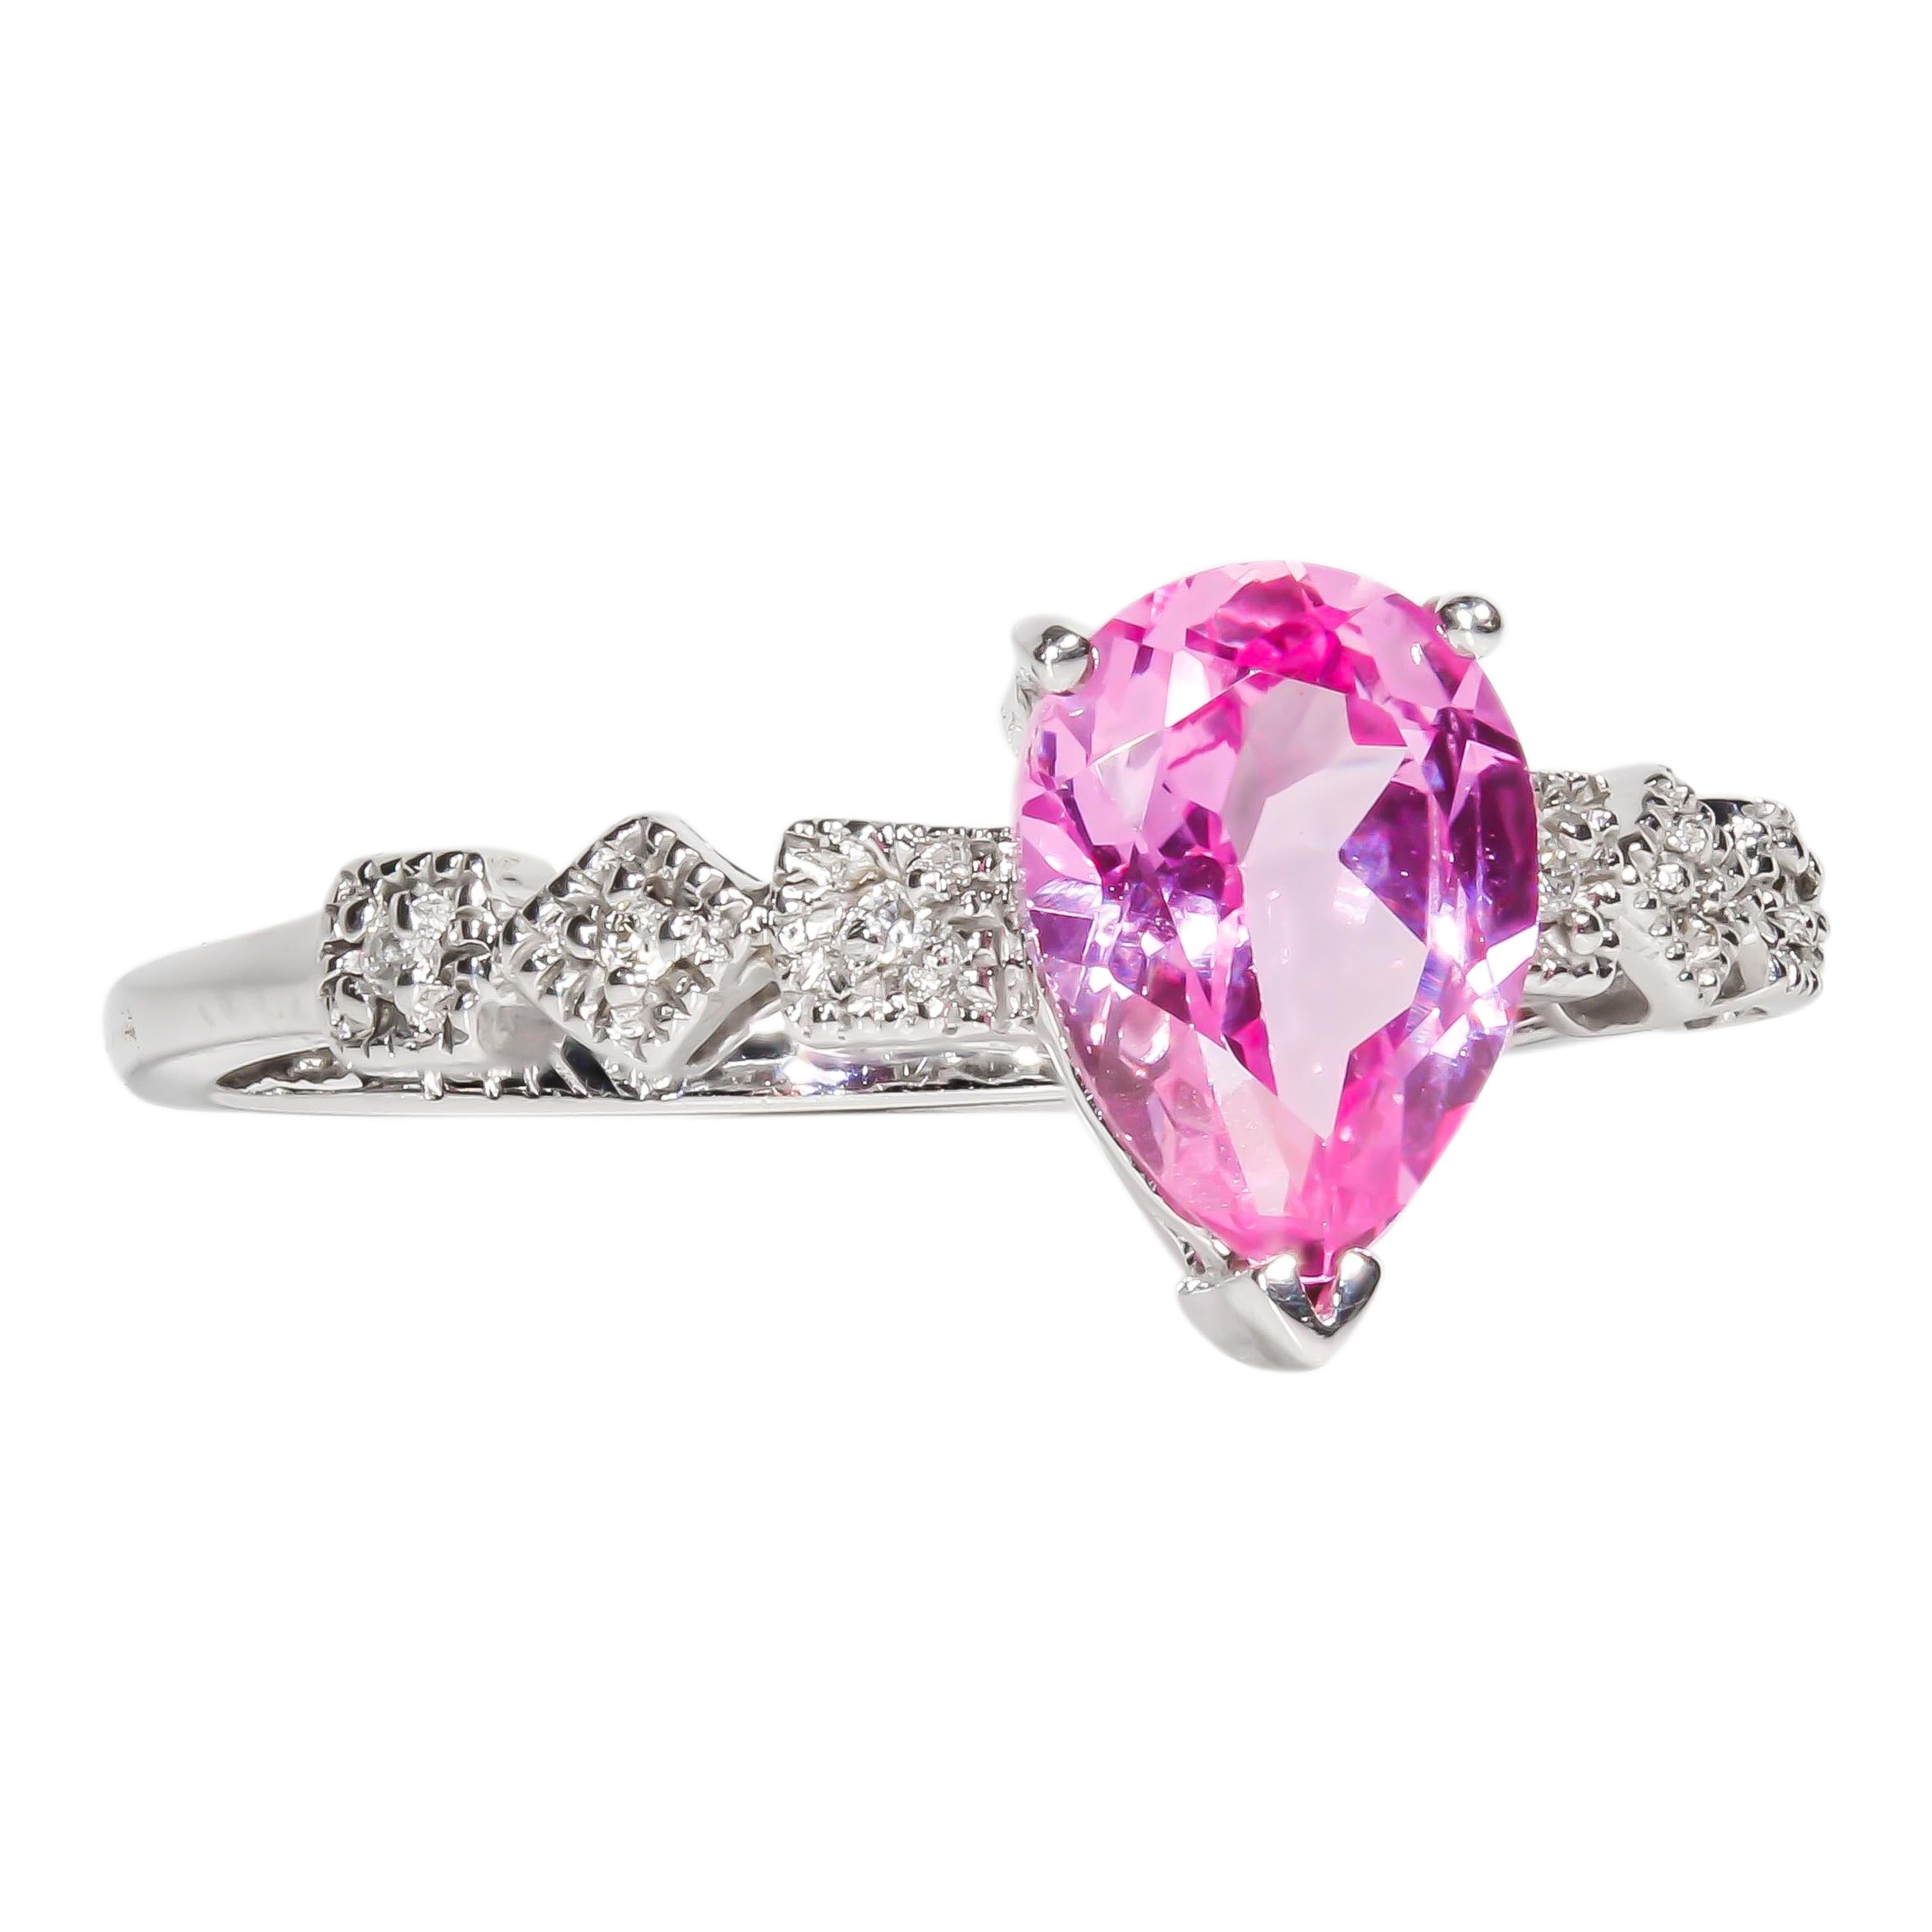 14 karat white gold cocktail ring containing a 1.50 carat prong set pink topaz center stone with six pave set round brilliant diamond side stones. The total weight of the diamond side stones is 0.06 carats.

All new items are guaranteed to be